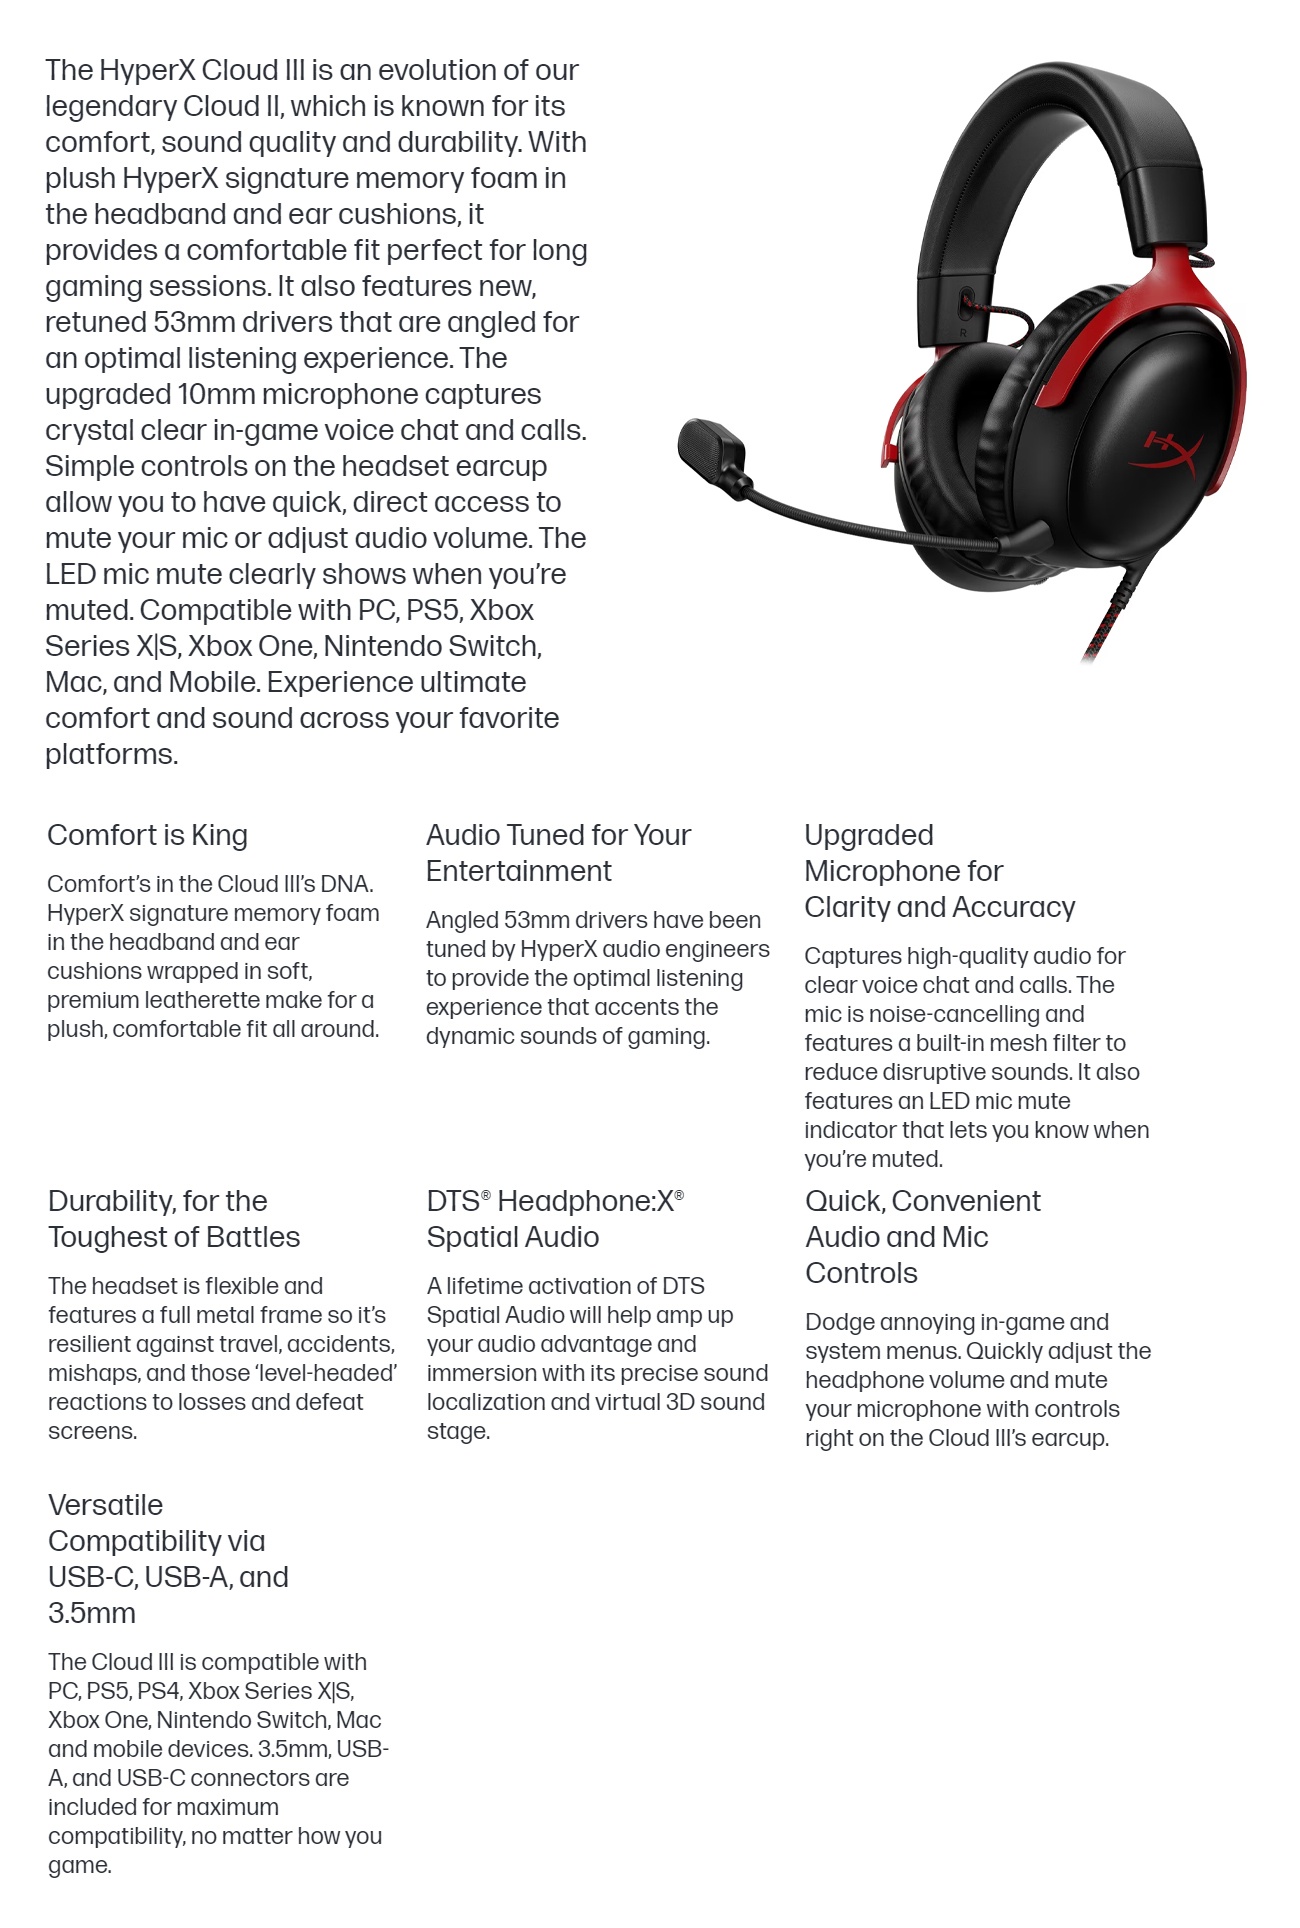 A large marketing image providing additional information about the product HyperX Cloud III - Wired Gaming Headset (Red) - Additional alt info not provided